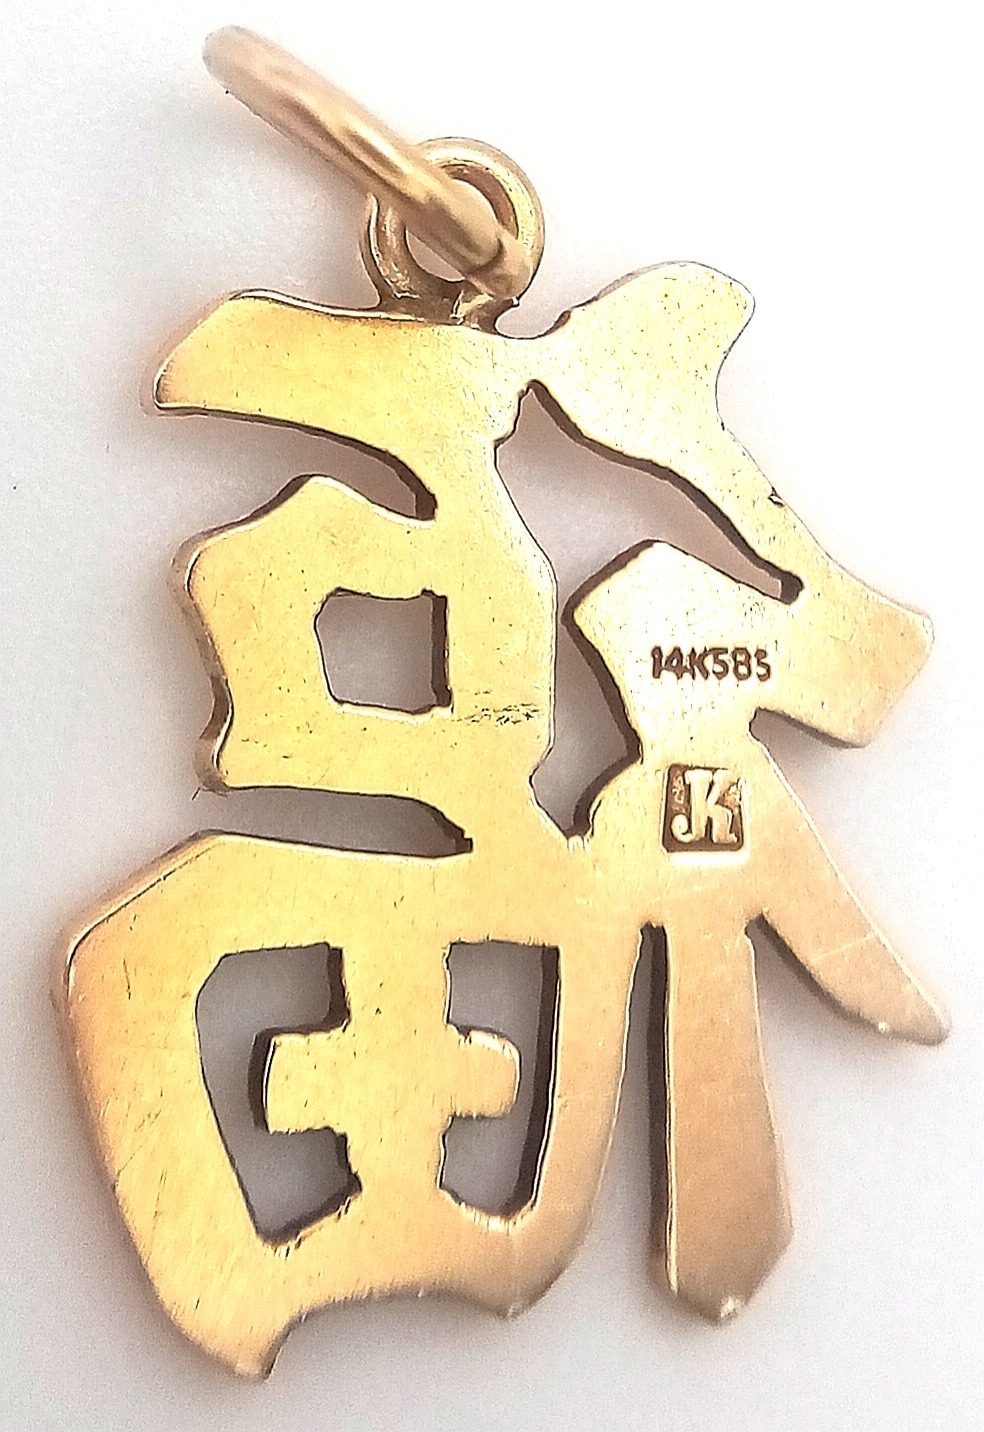 A 14K YELLOW GOLD CHINESE GOOD LUCK/HAPPINESS CHARM/PENDANT. 2.2cm, 1.7g total weight. Ref: SC 8058 - Image 3 of 6